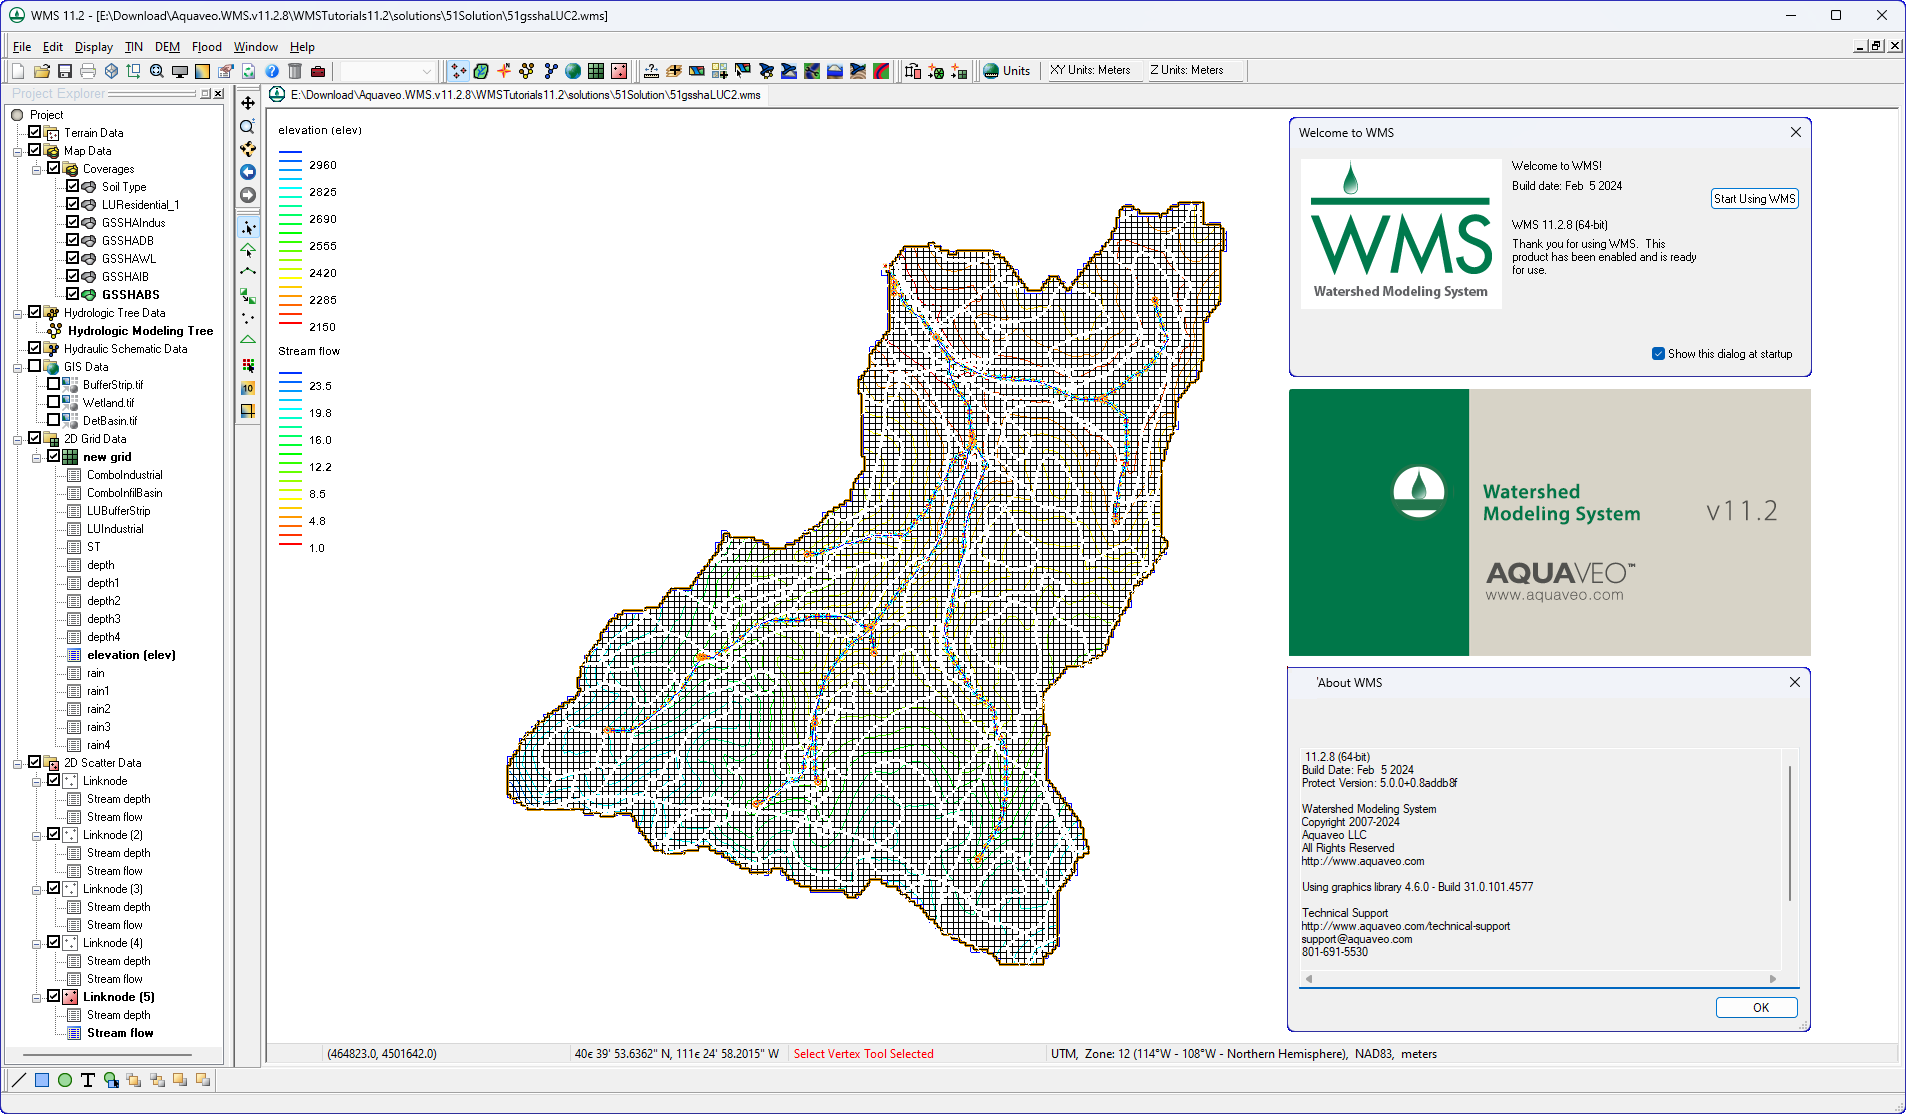 Working with Aquaveo Watershed Modeling System 11.2.8 full